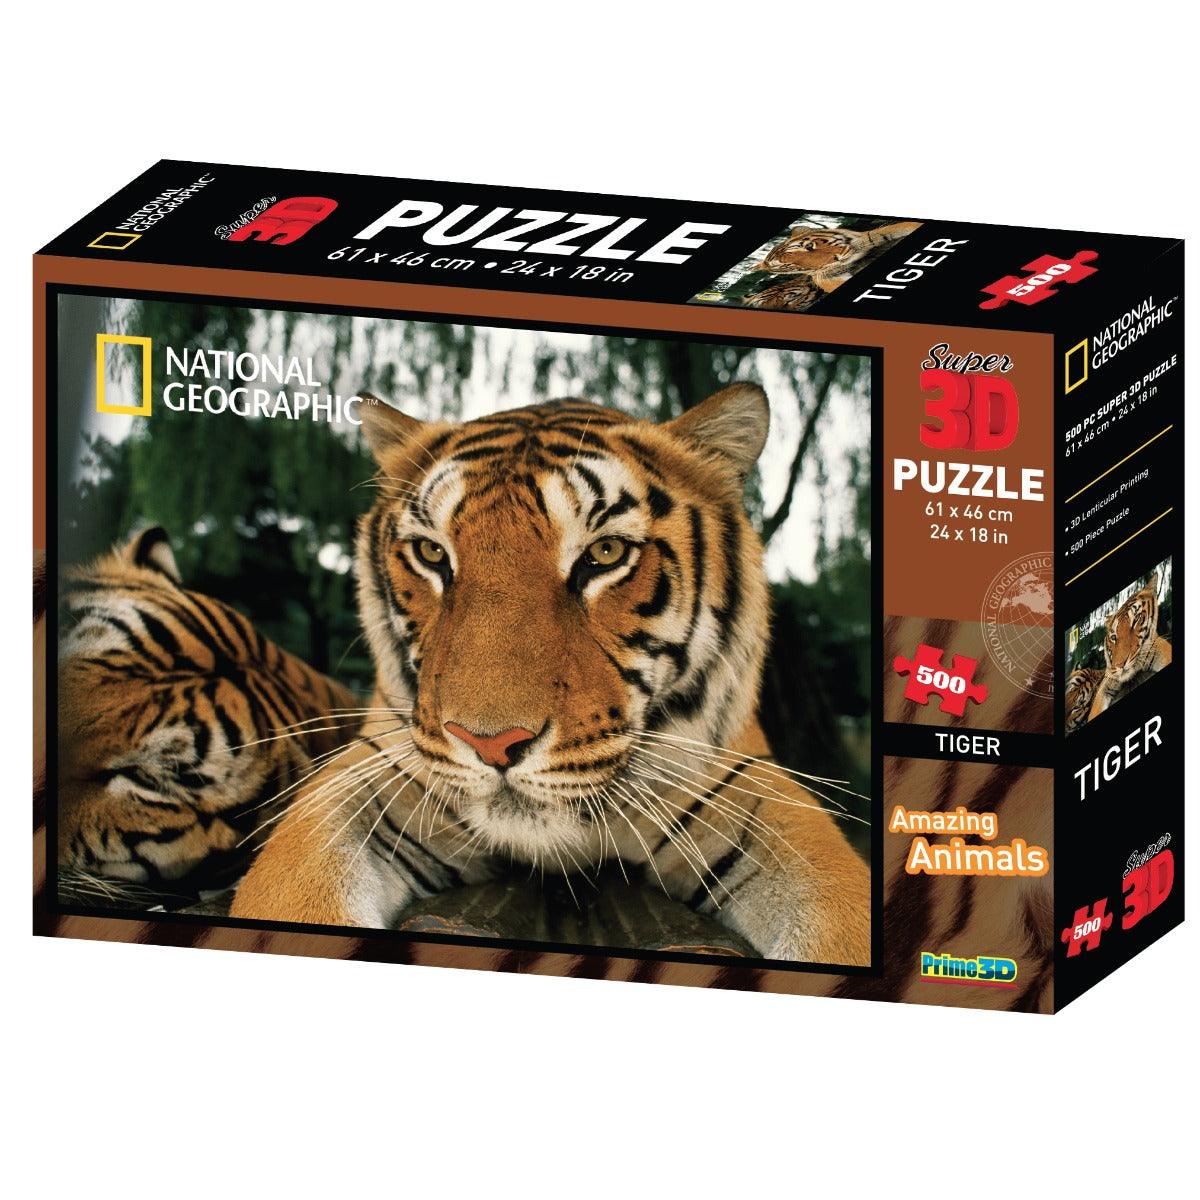 Prime 3D National Geographic Tiger Puzzle (500 Pieces)